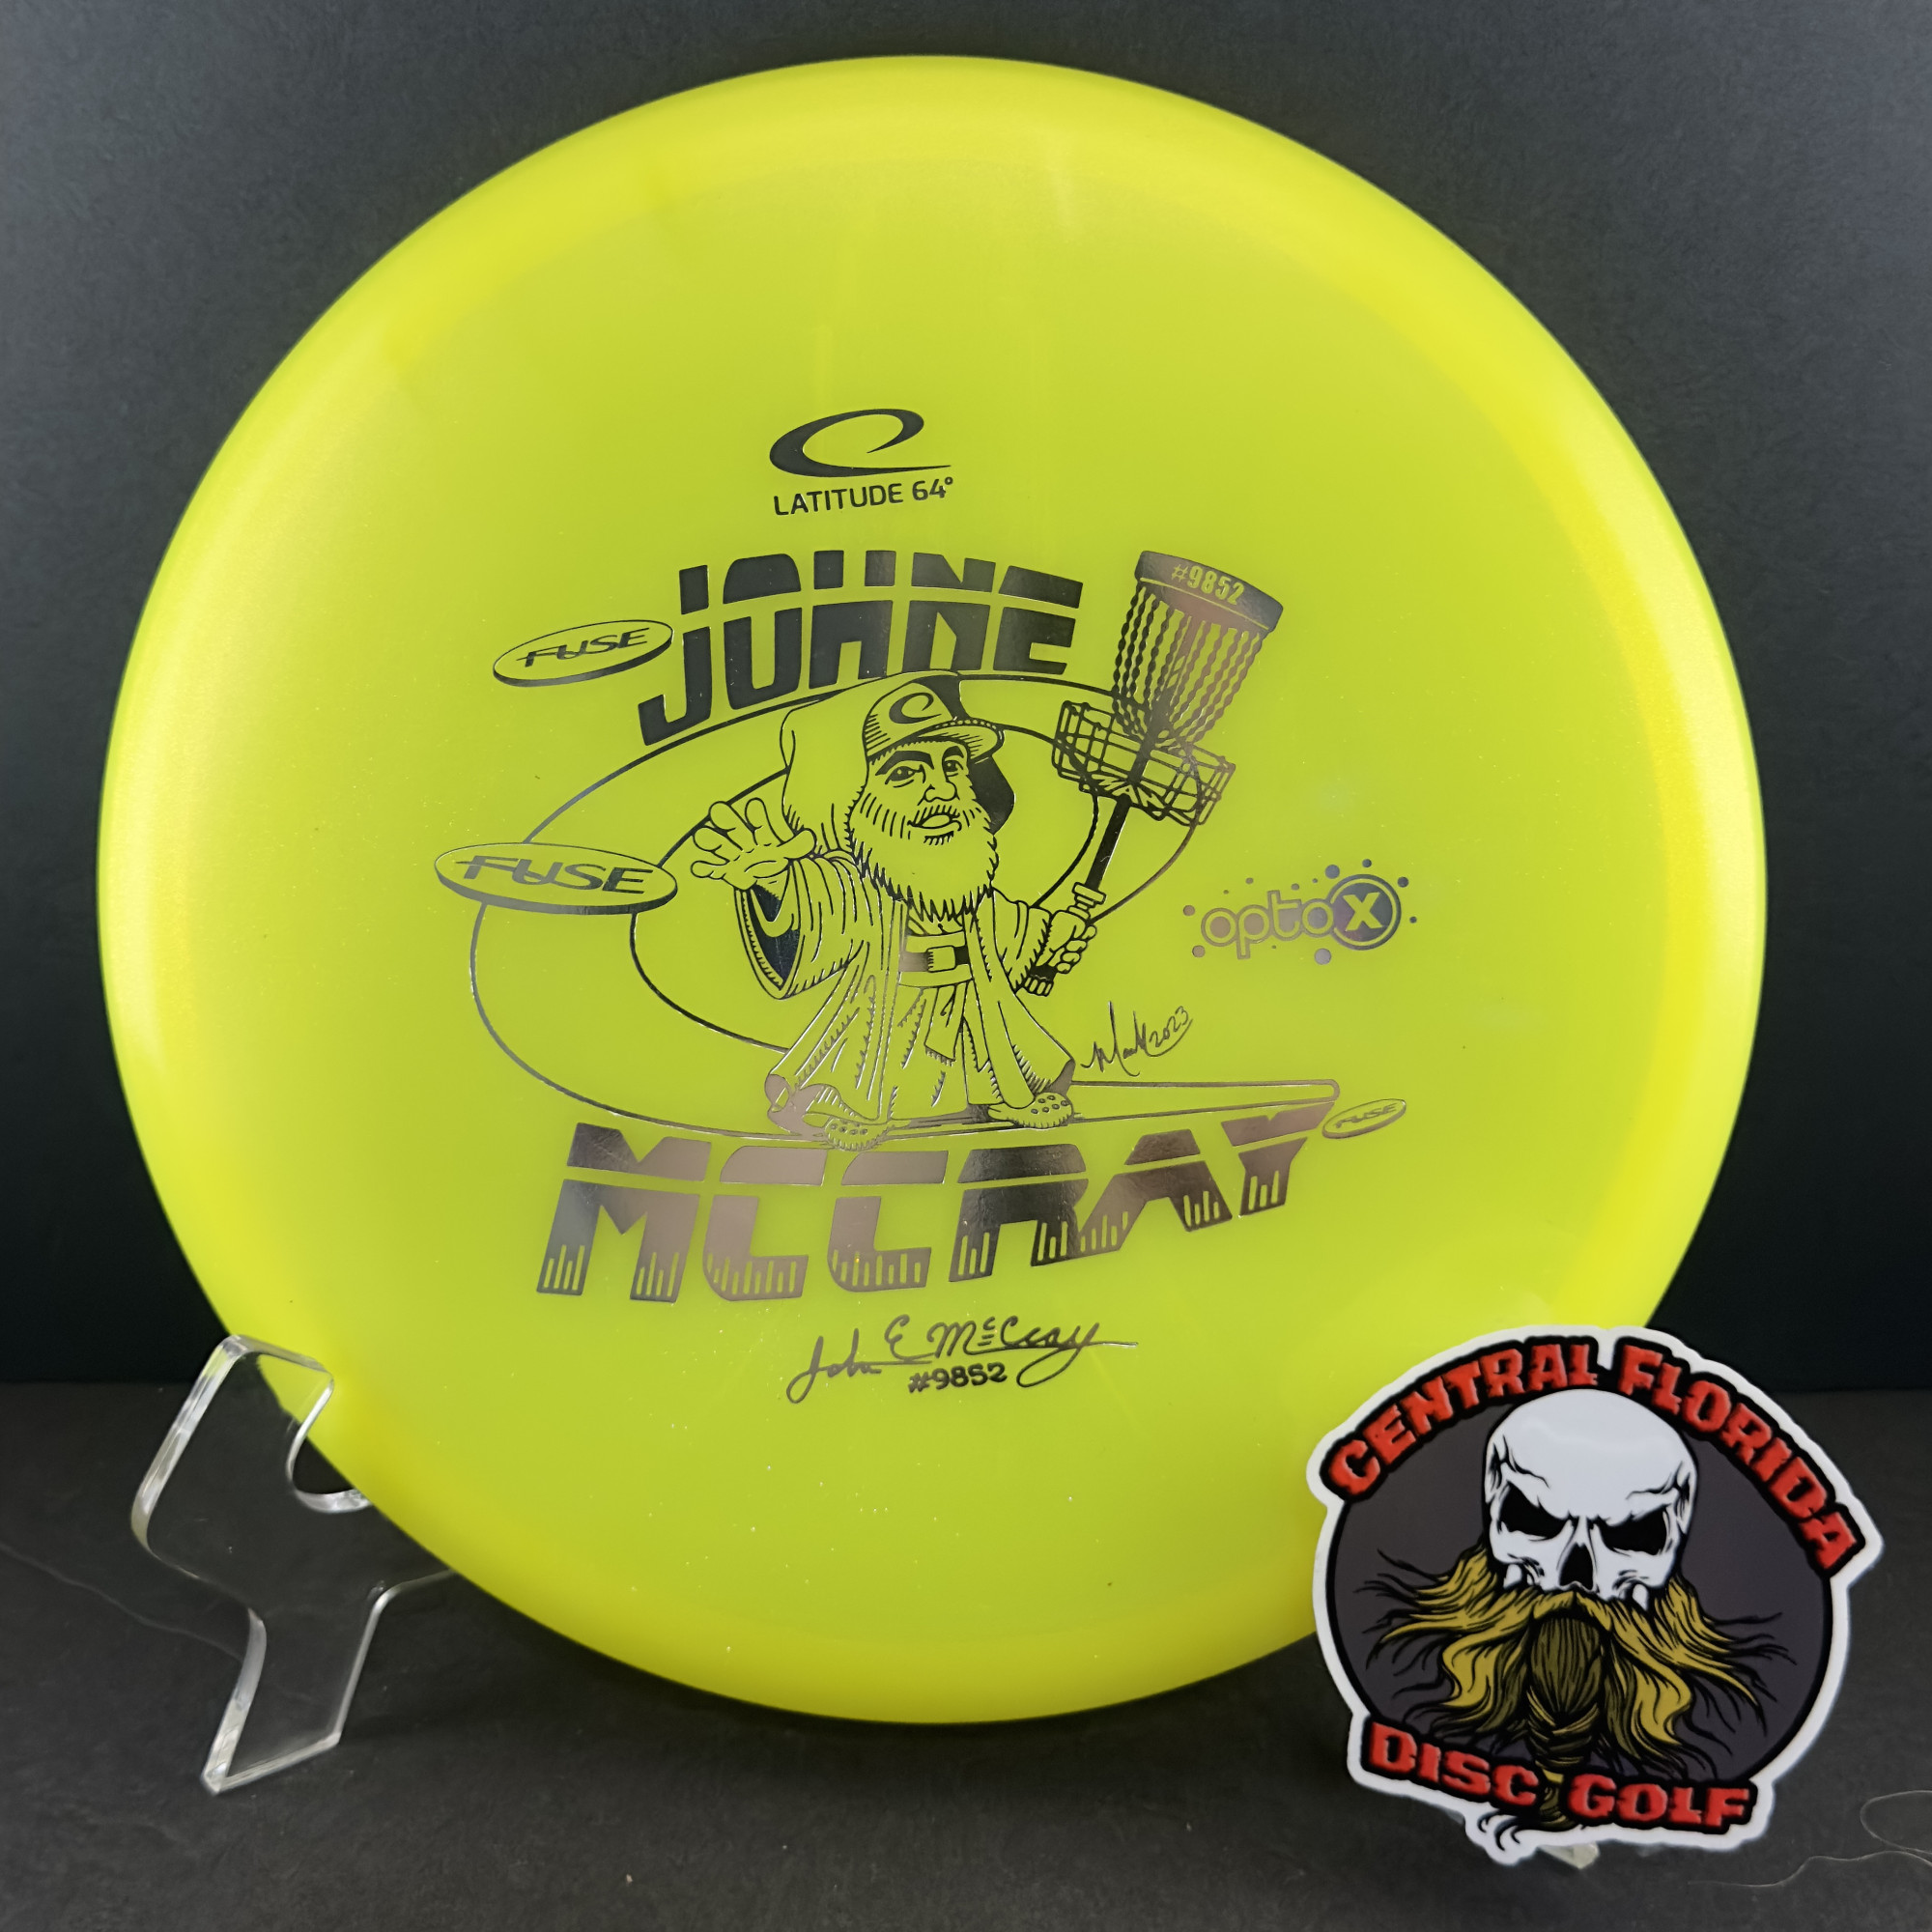 products LATITUDE 64 - JOHNE McCRAY OPTO-X GLIMMER FUSE - 180G - YELLOW/SILVER